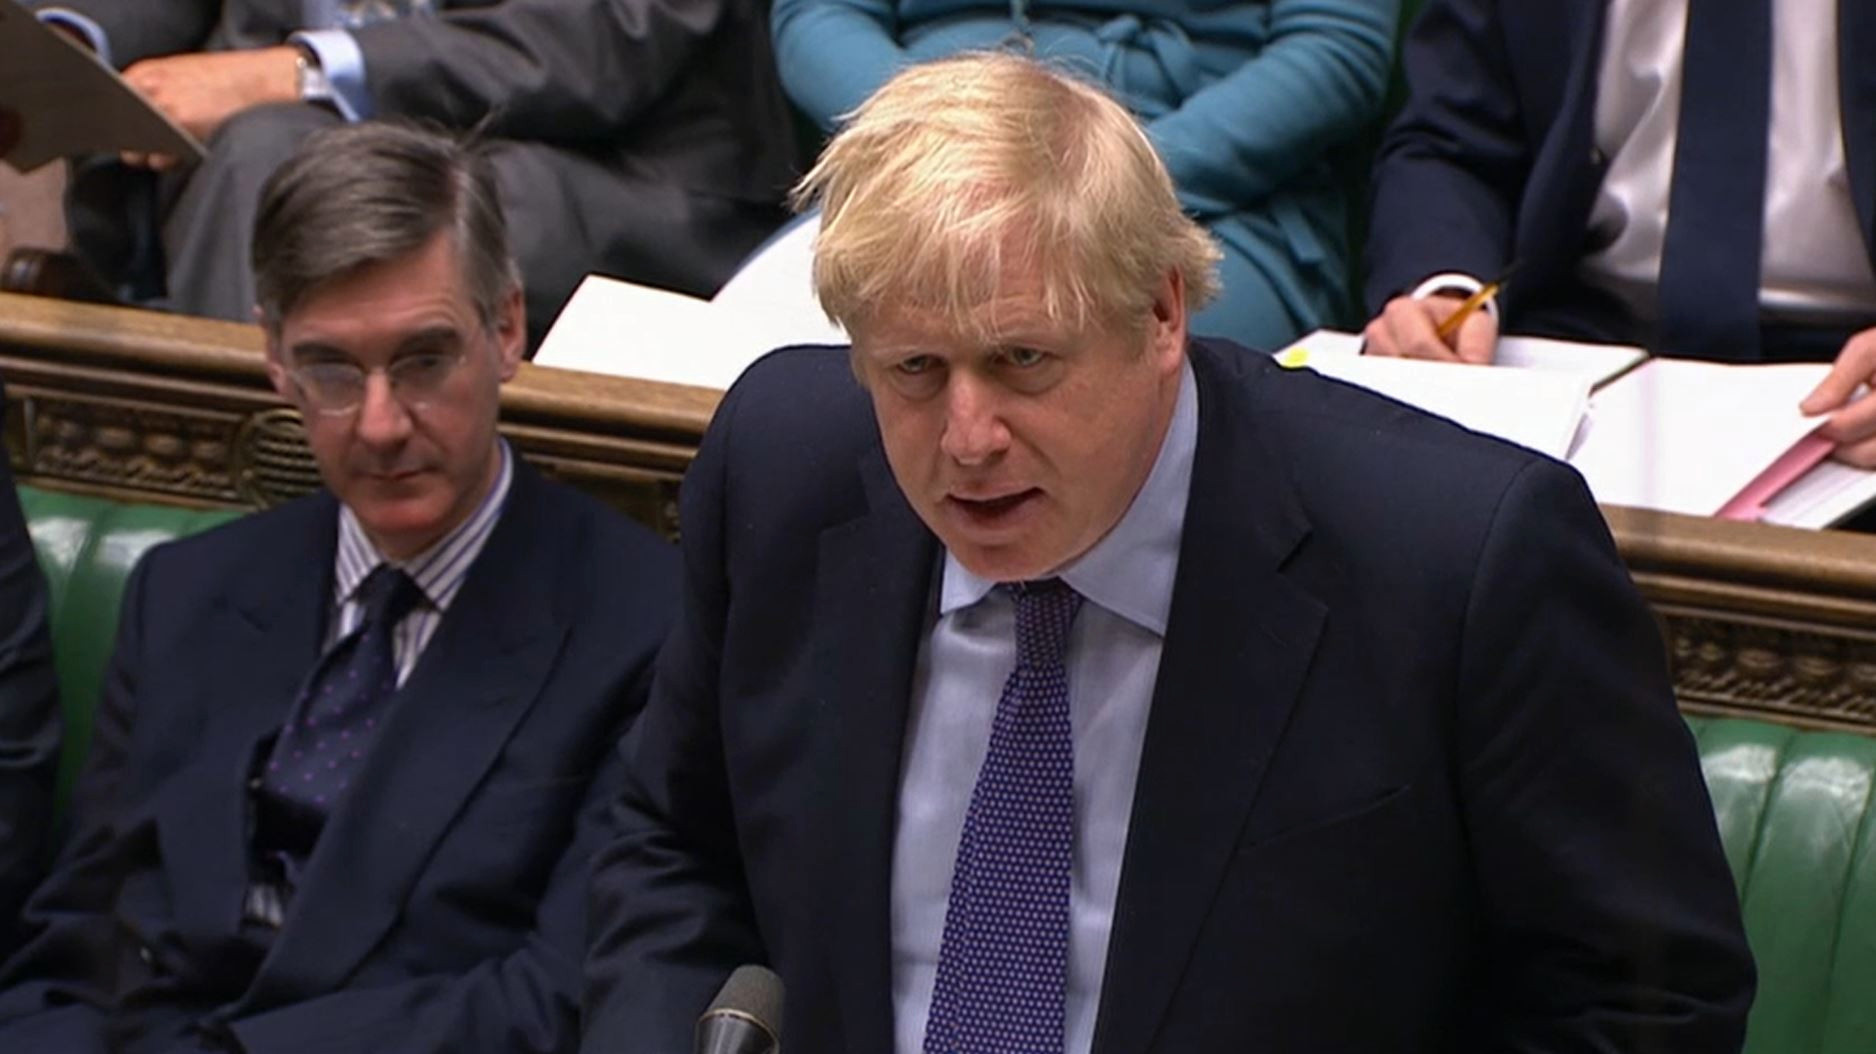 PM Boris Johnson was advised that the tax burden is currently 'the highest in 50 years'